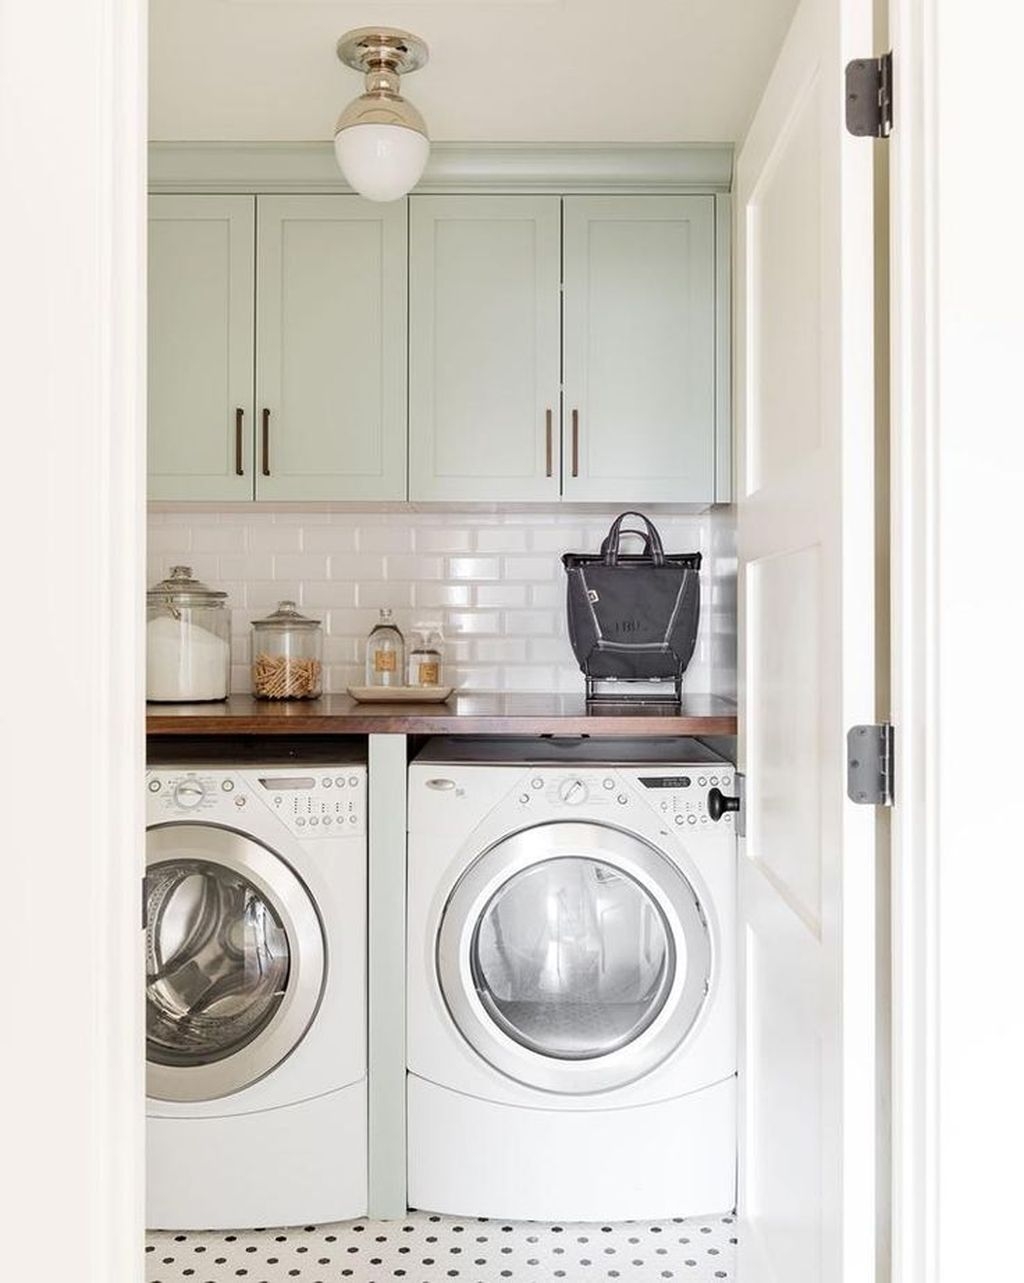 Inspiring Laundry Room Design With French Country Style 37